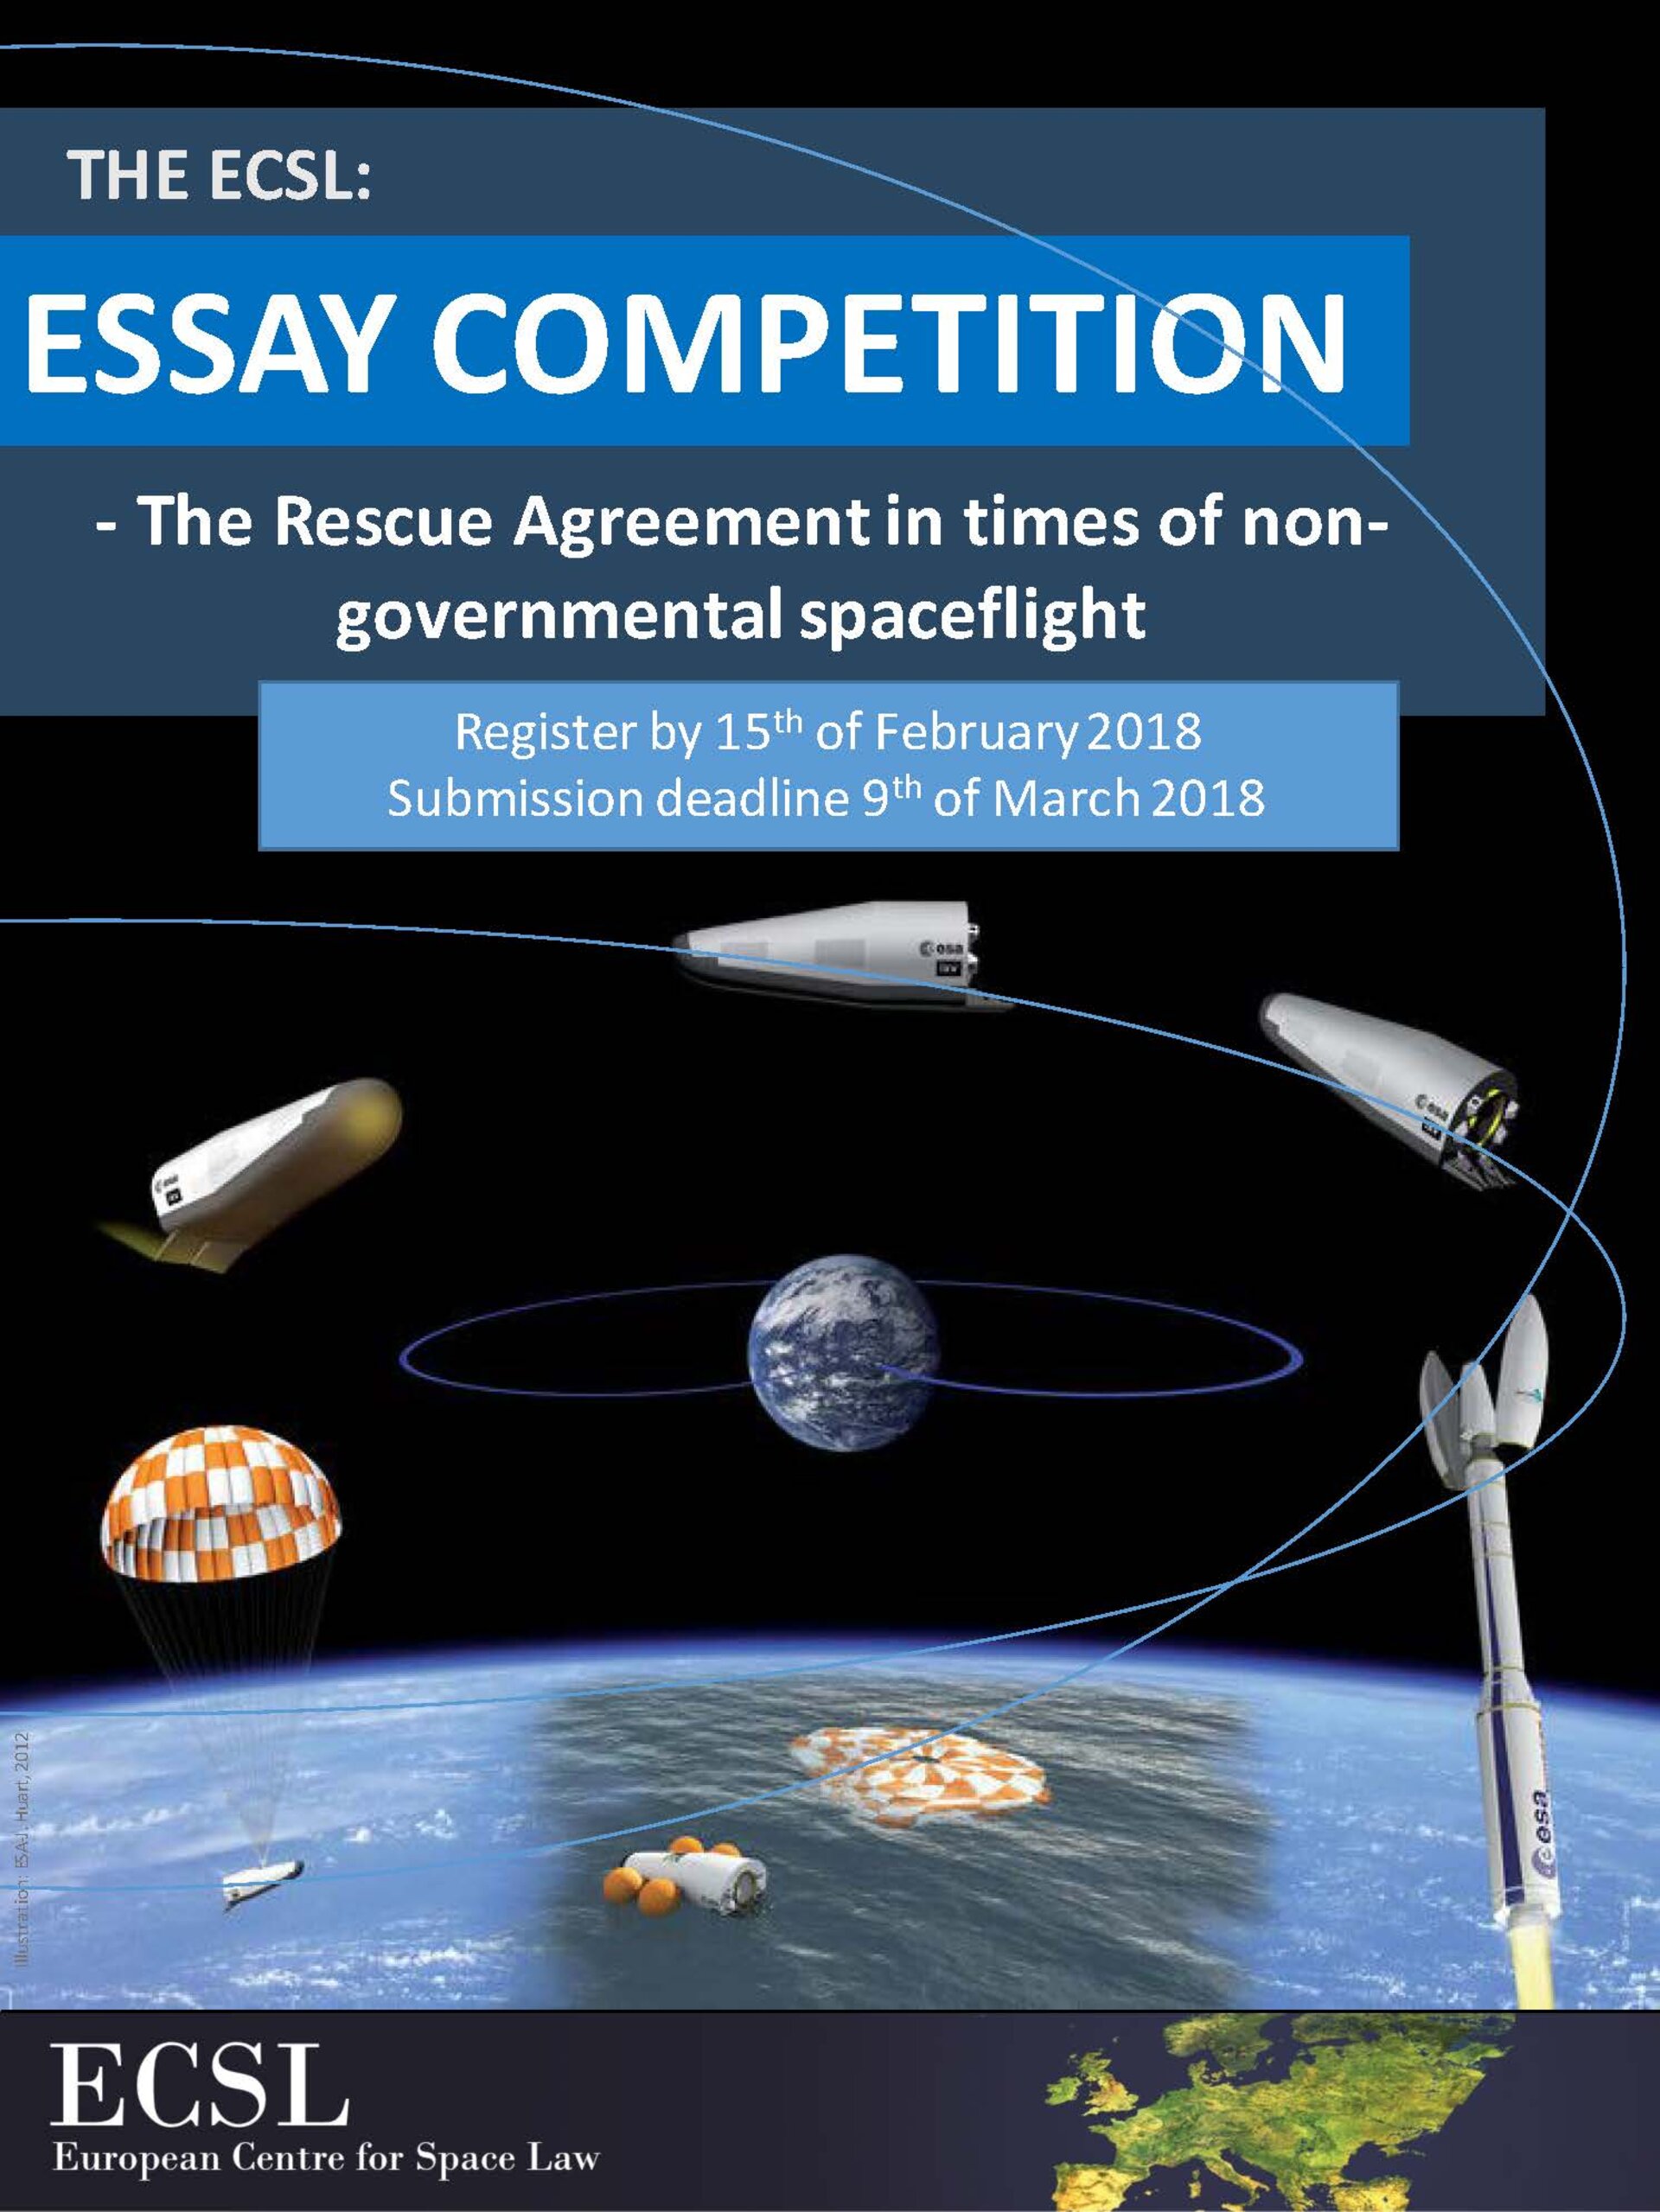 Essay competition poster